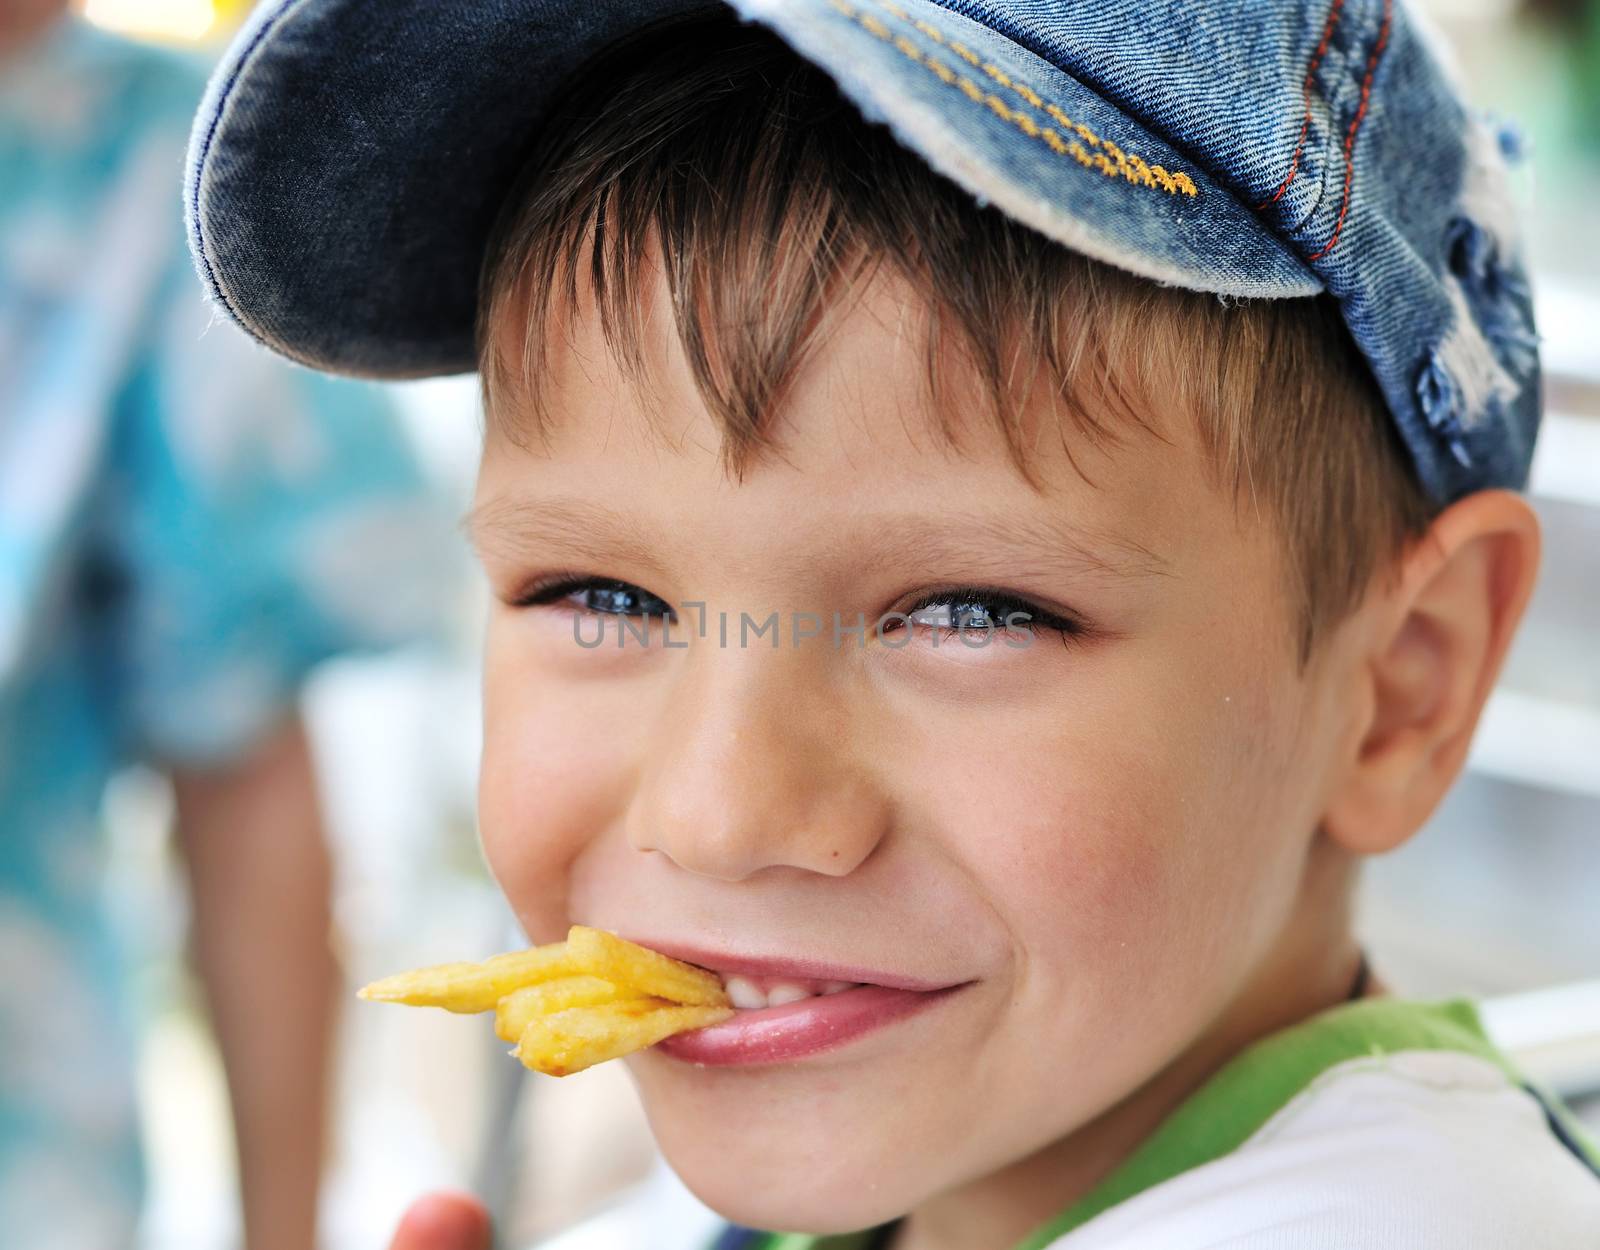 little boy eating french fries in cafe 